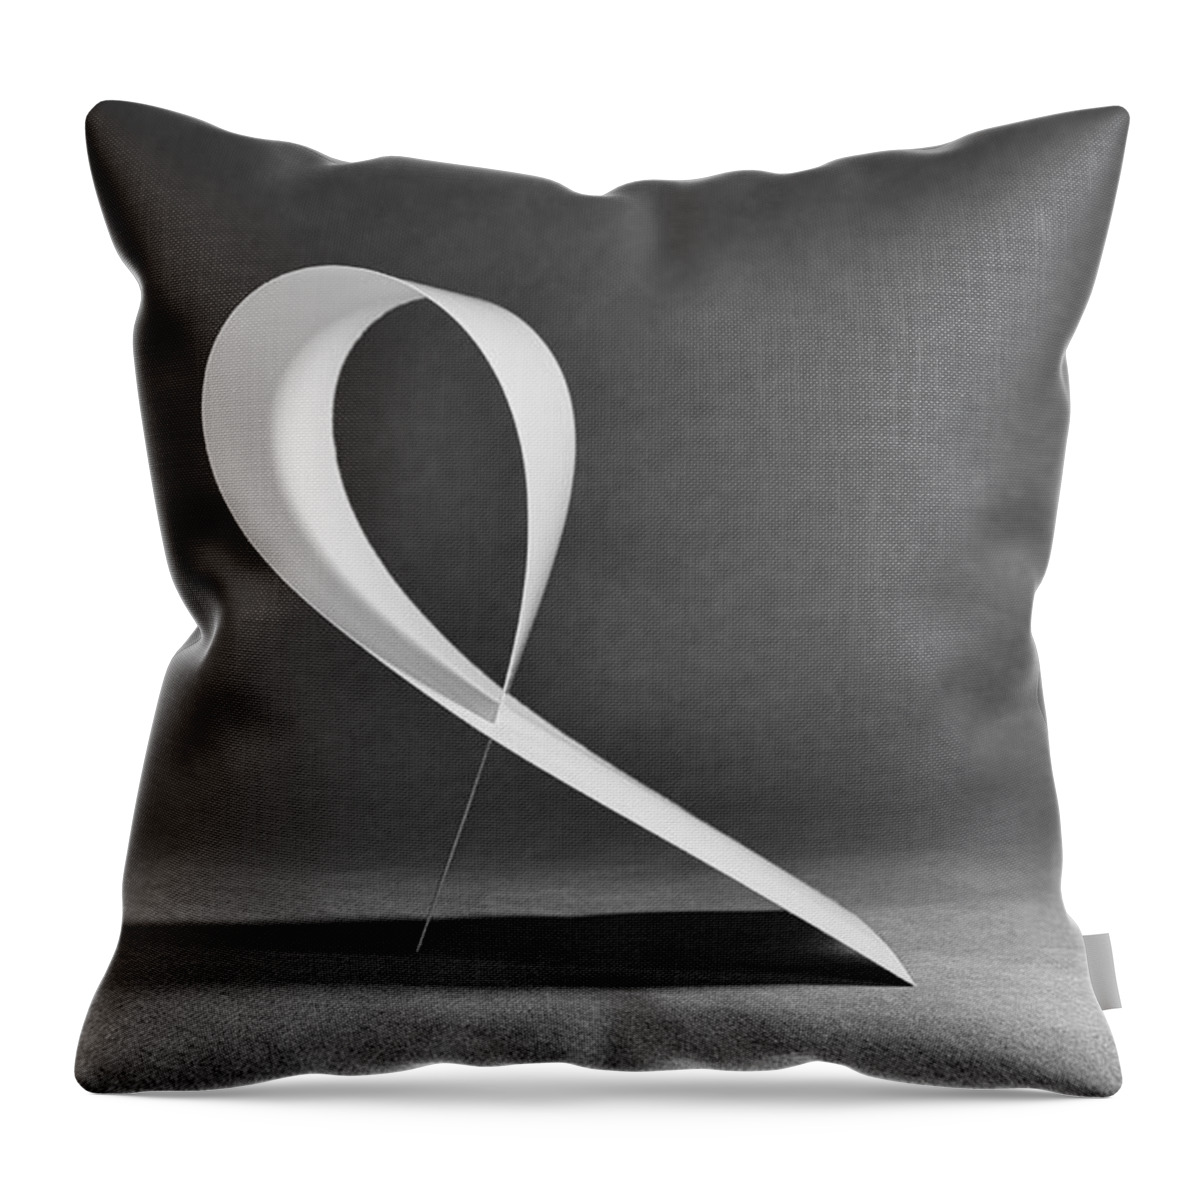 Black And White Throw Pillow featuring the photograph Delicate Balance by Mary Lee Dereske